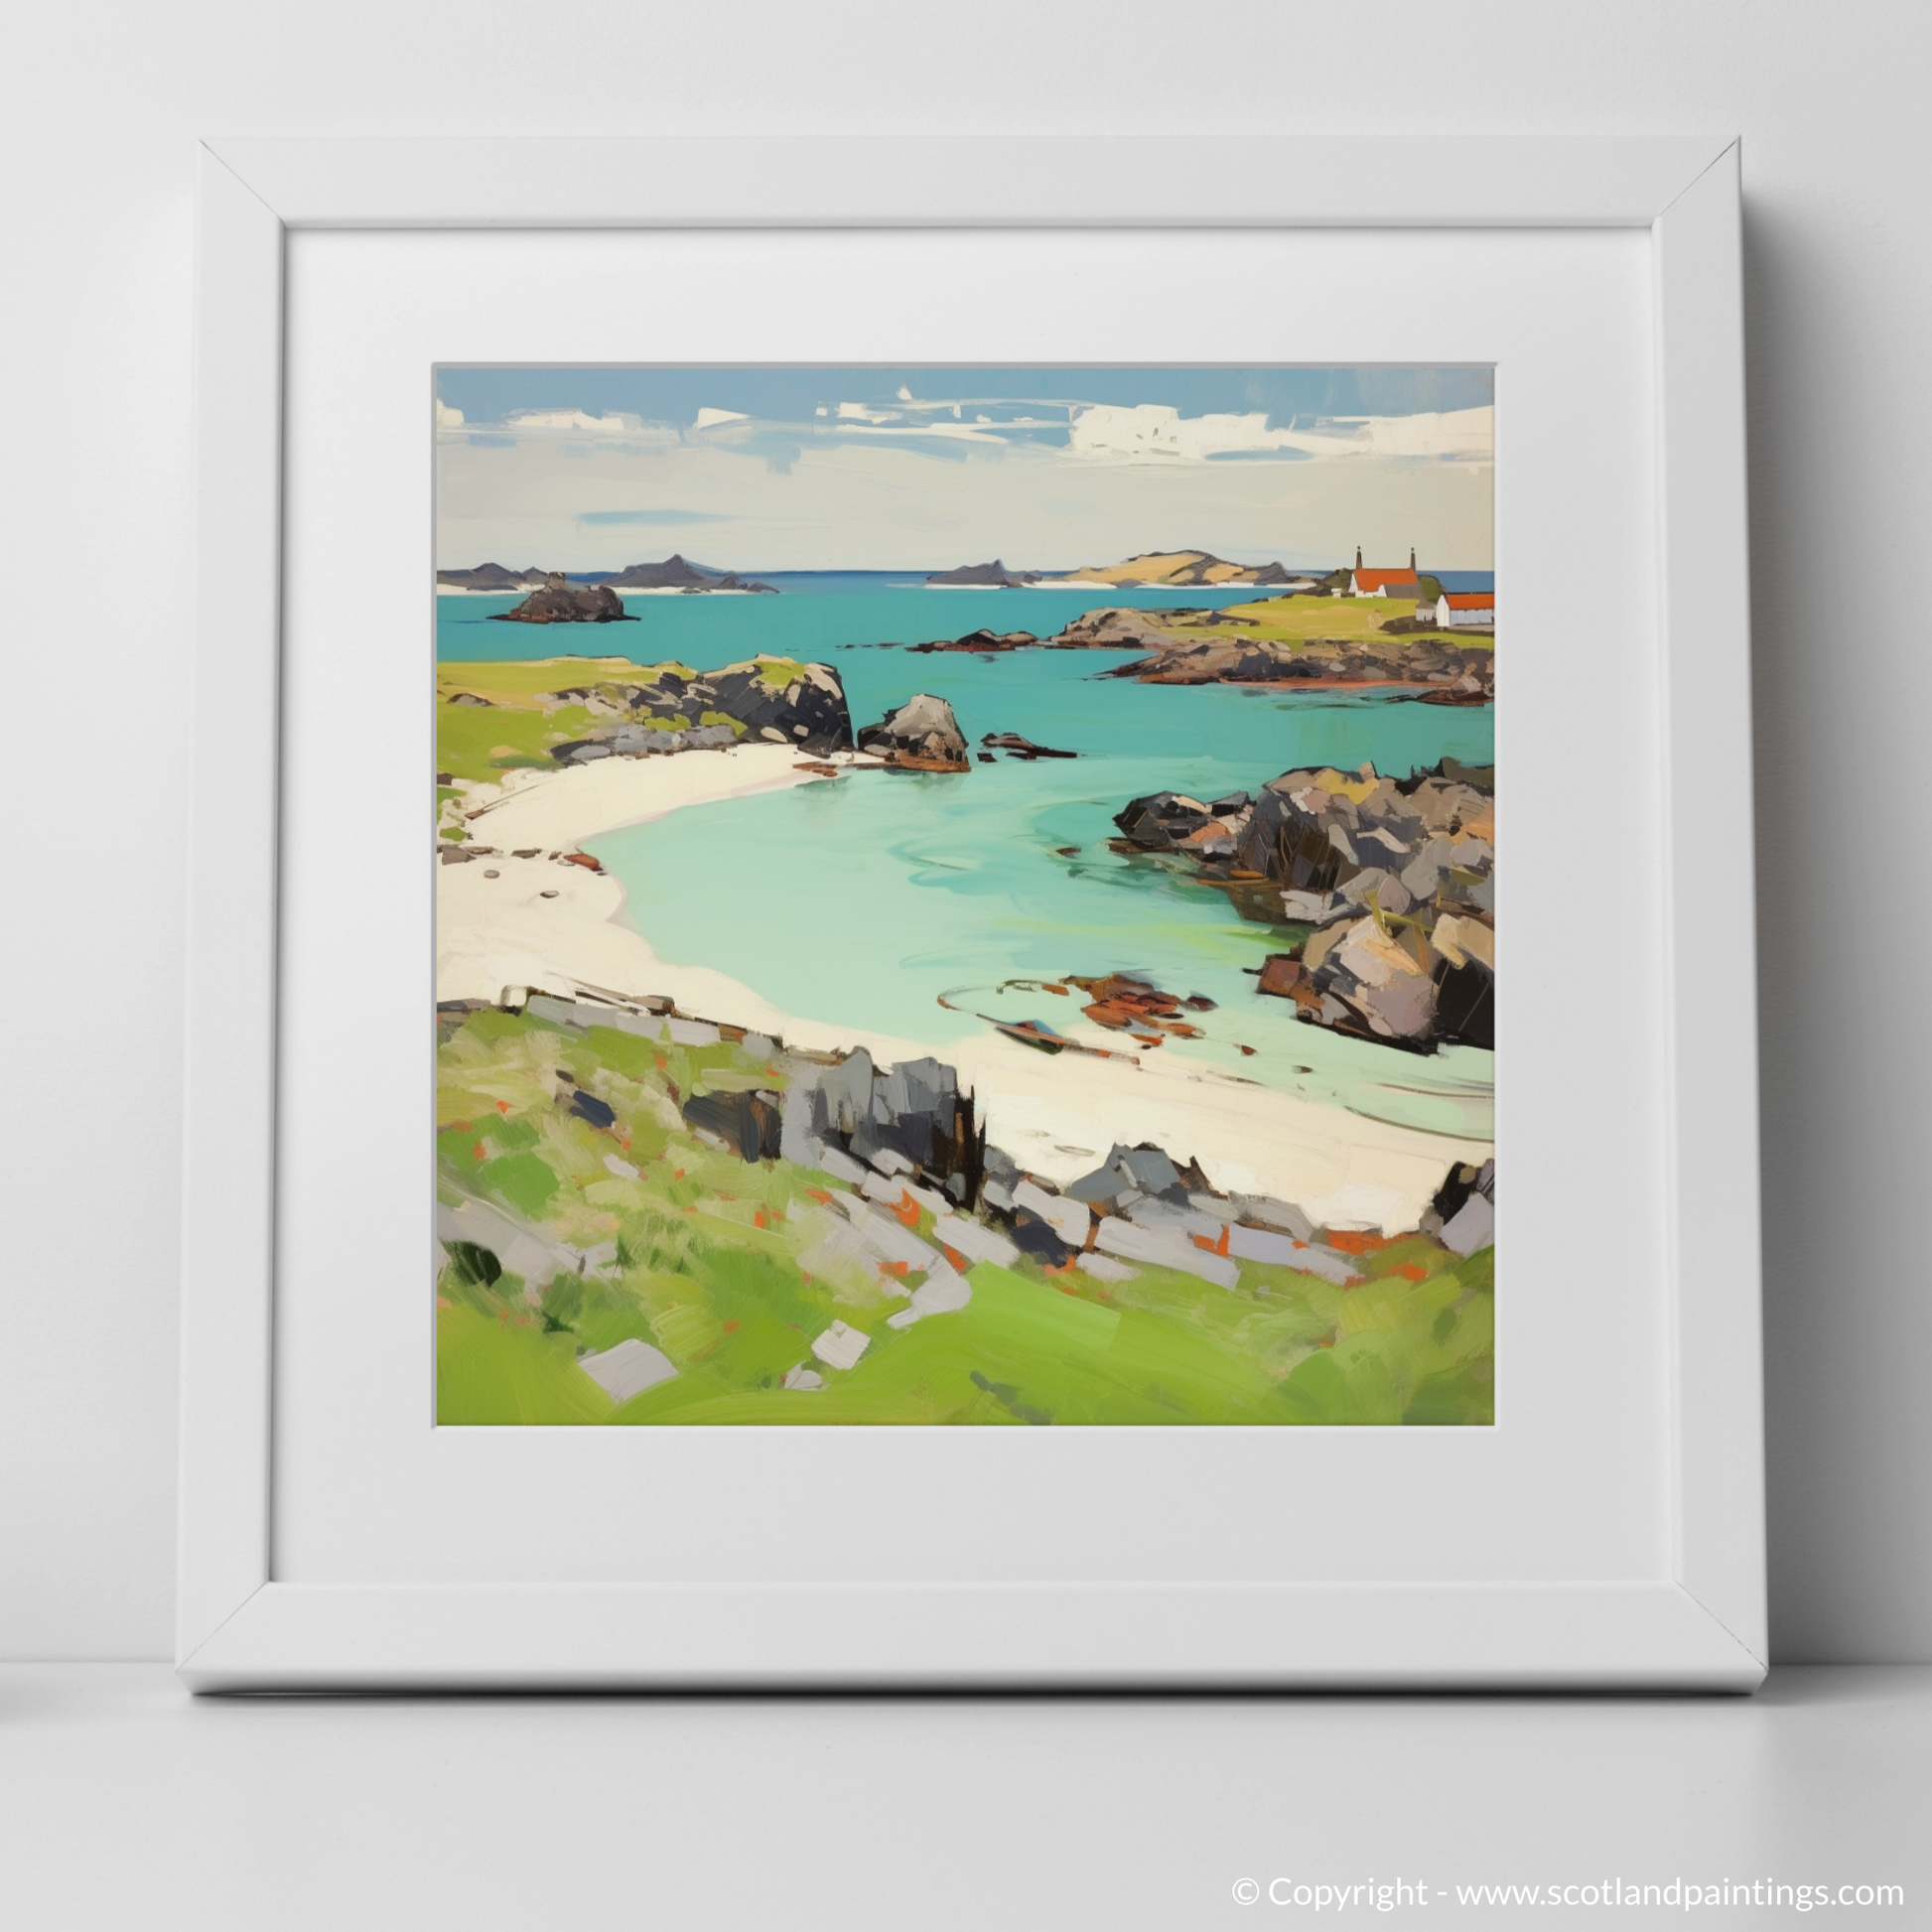 Art Print of Isle of Iona, Inner Hebrides with a white frame